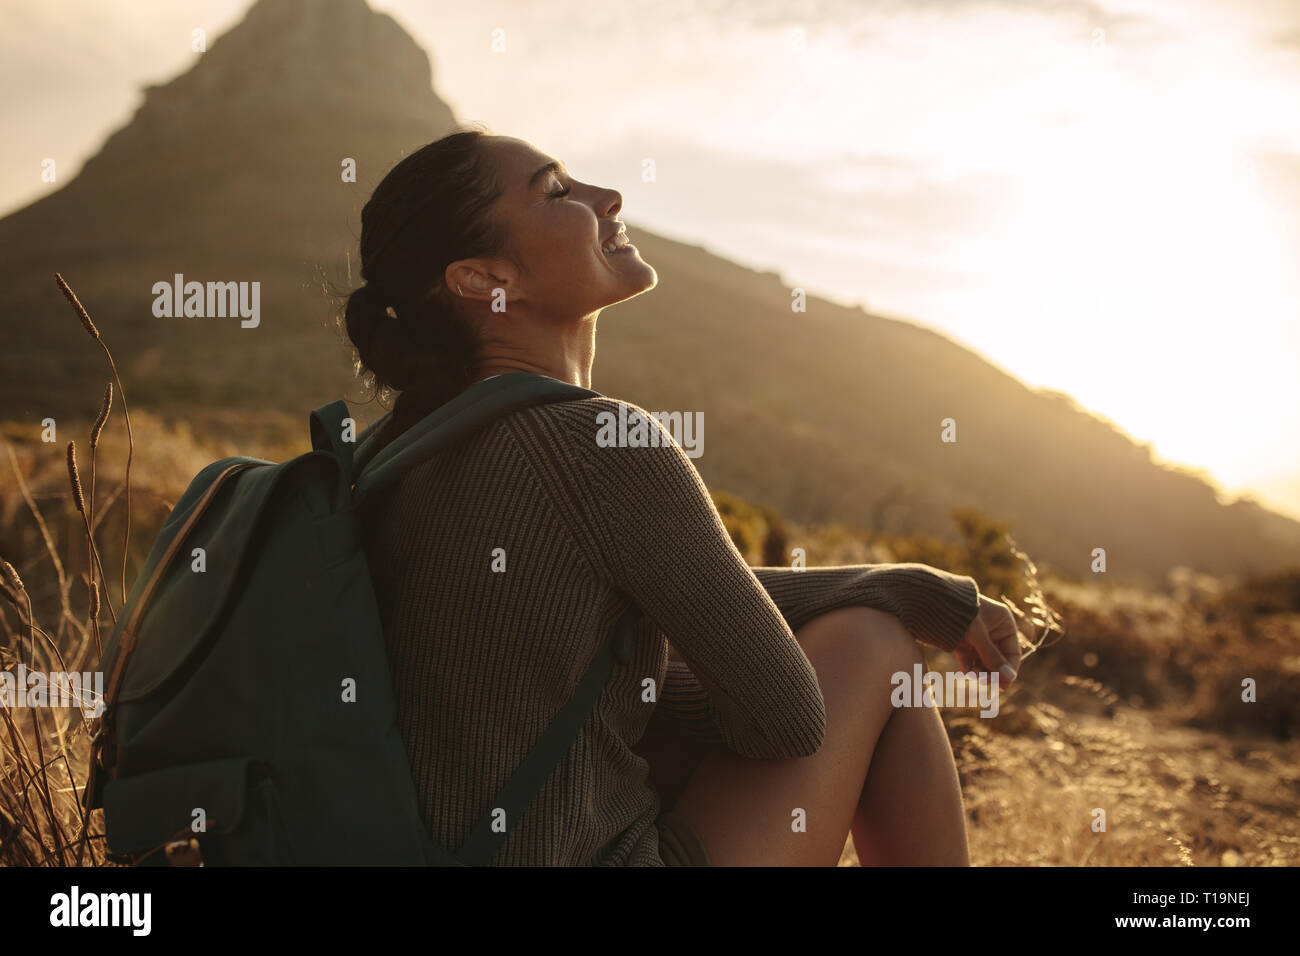 Woman sitting on ground smiling with her eyes closed. Caucasian female tourist taking a break after hiking on country trail. Stock Photo